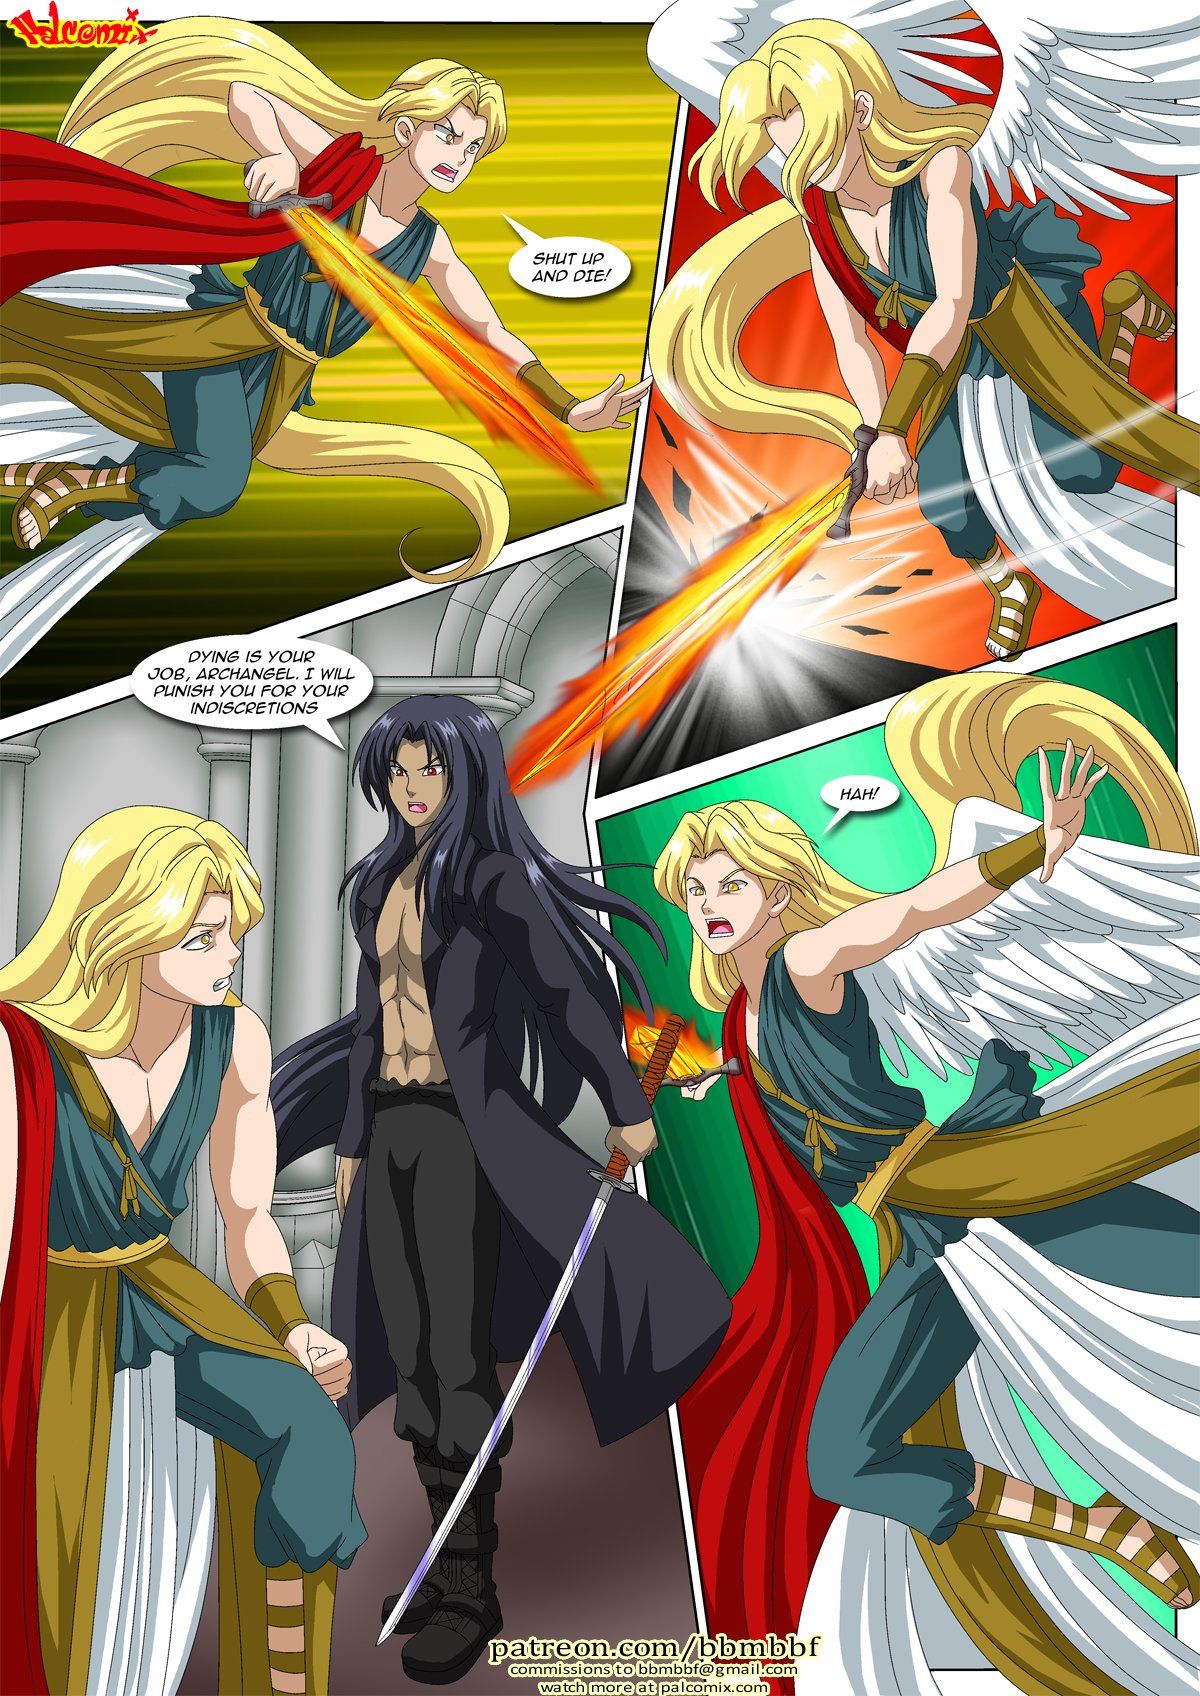 The Carnal Kingdom 6 - Angels and Demons page 65